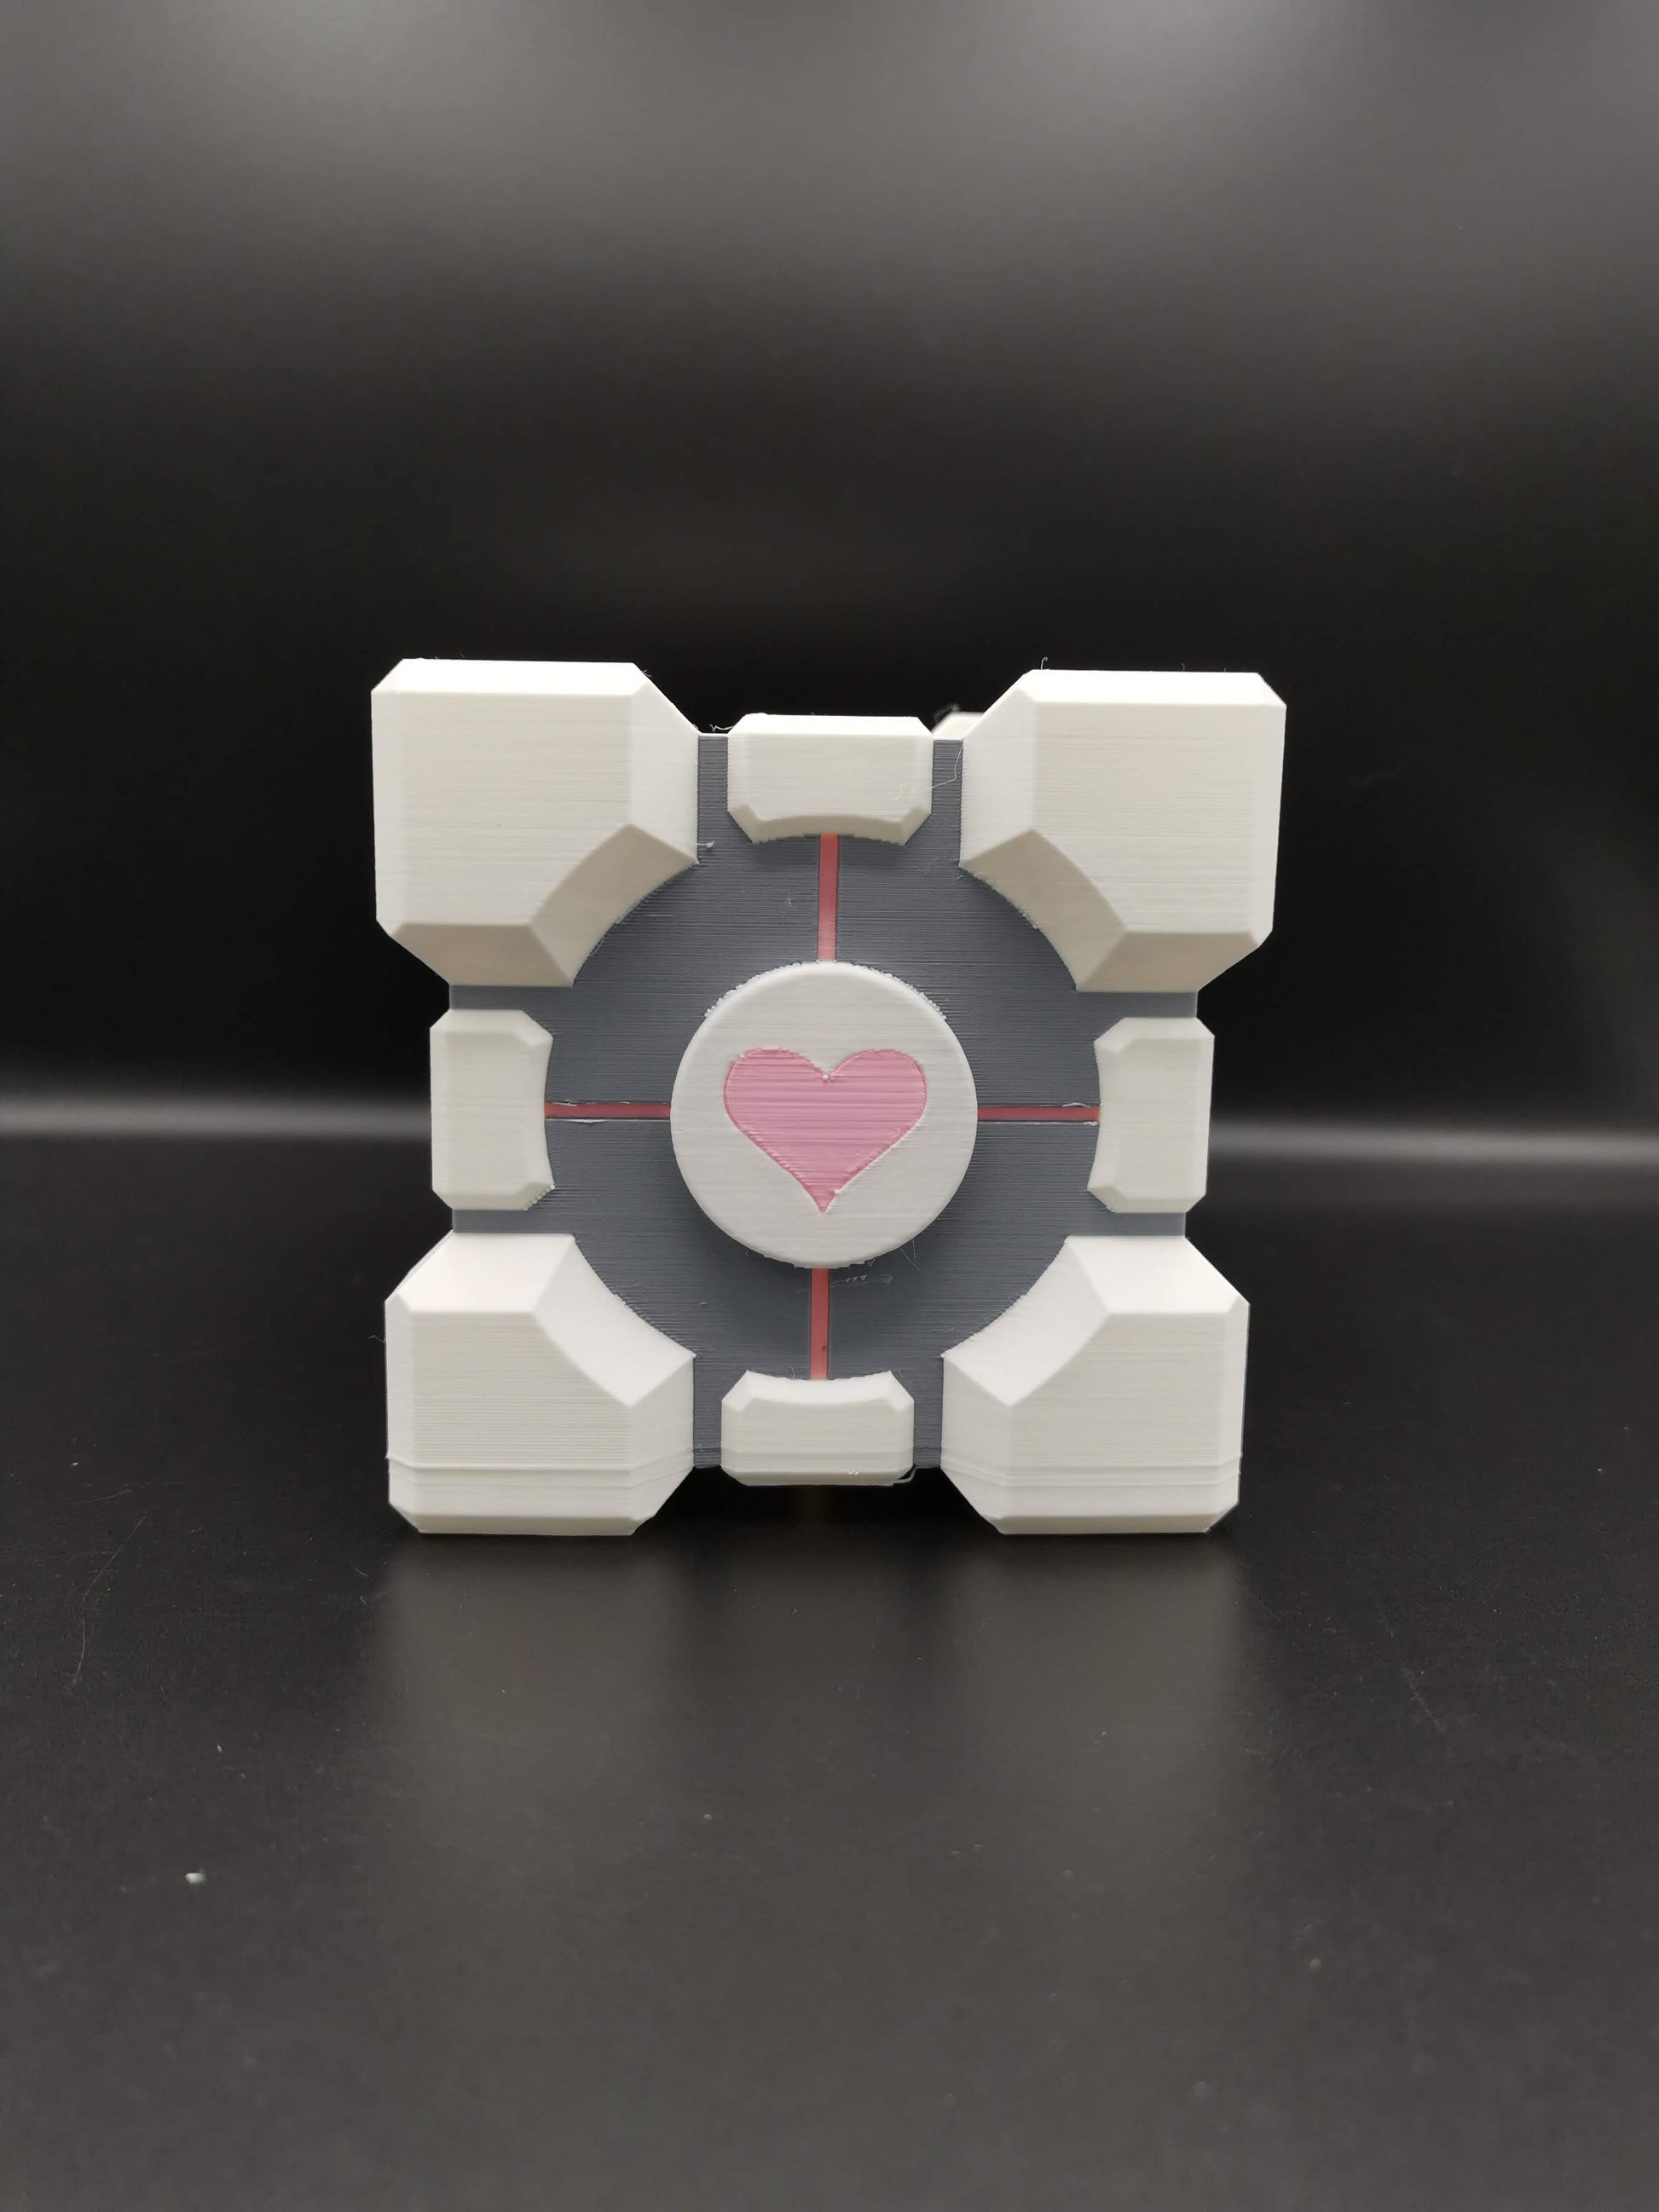 Companion Cube Portal planter close up from front